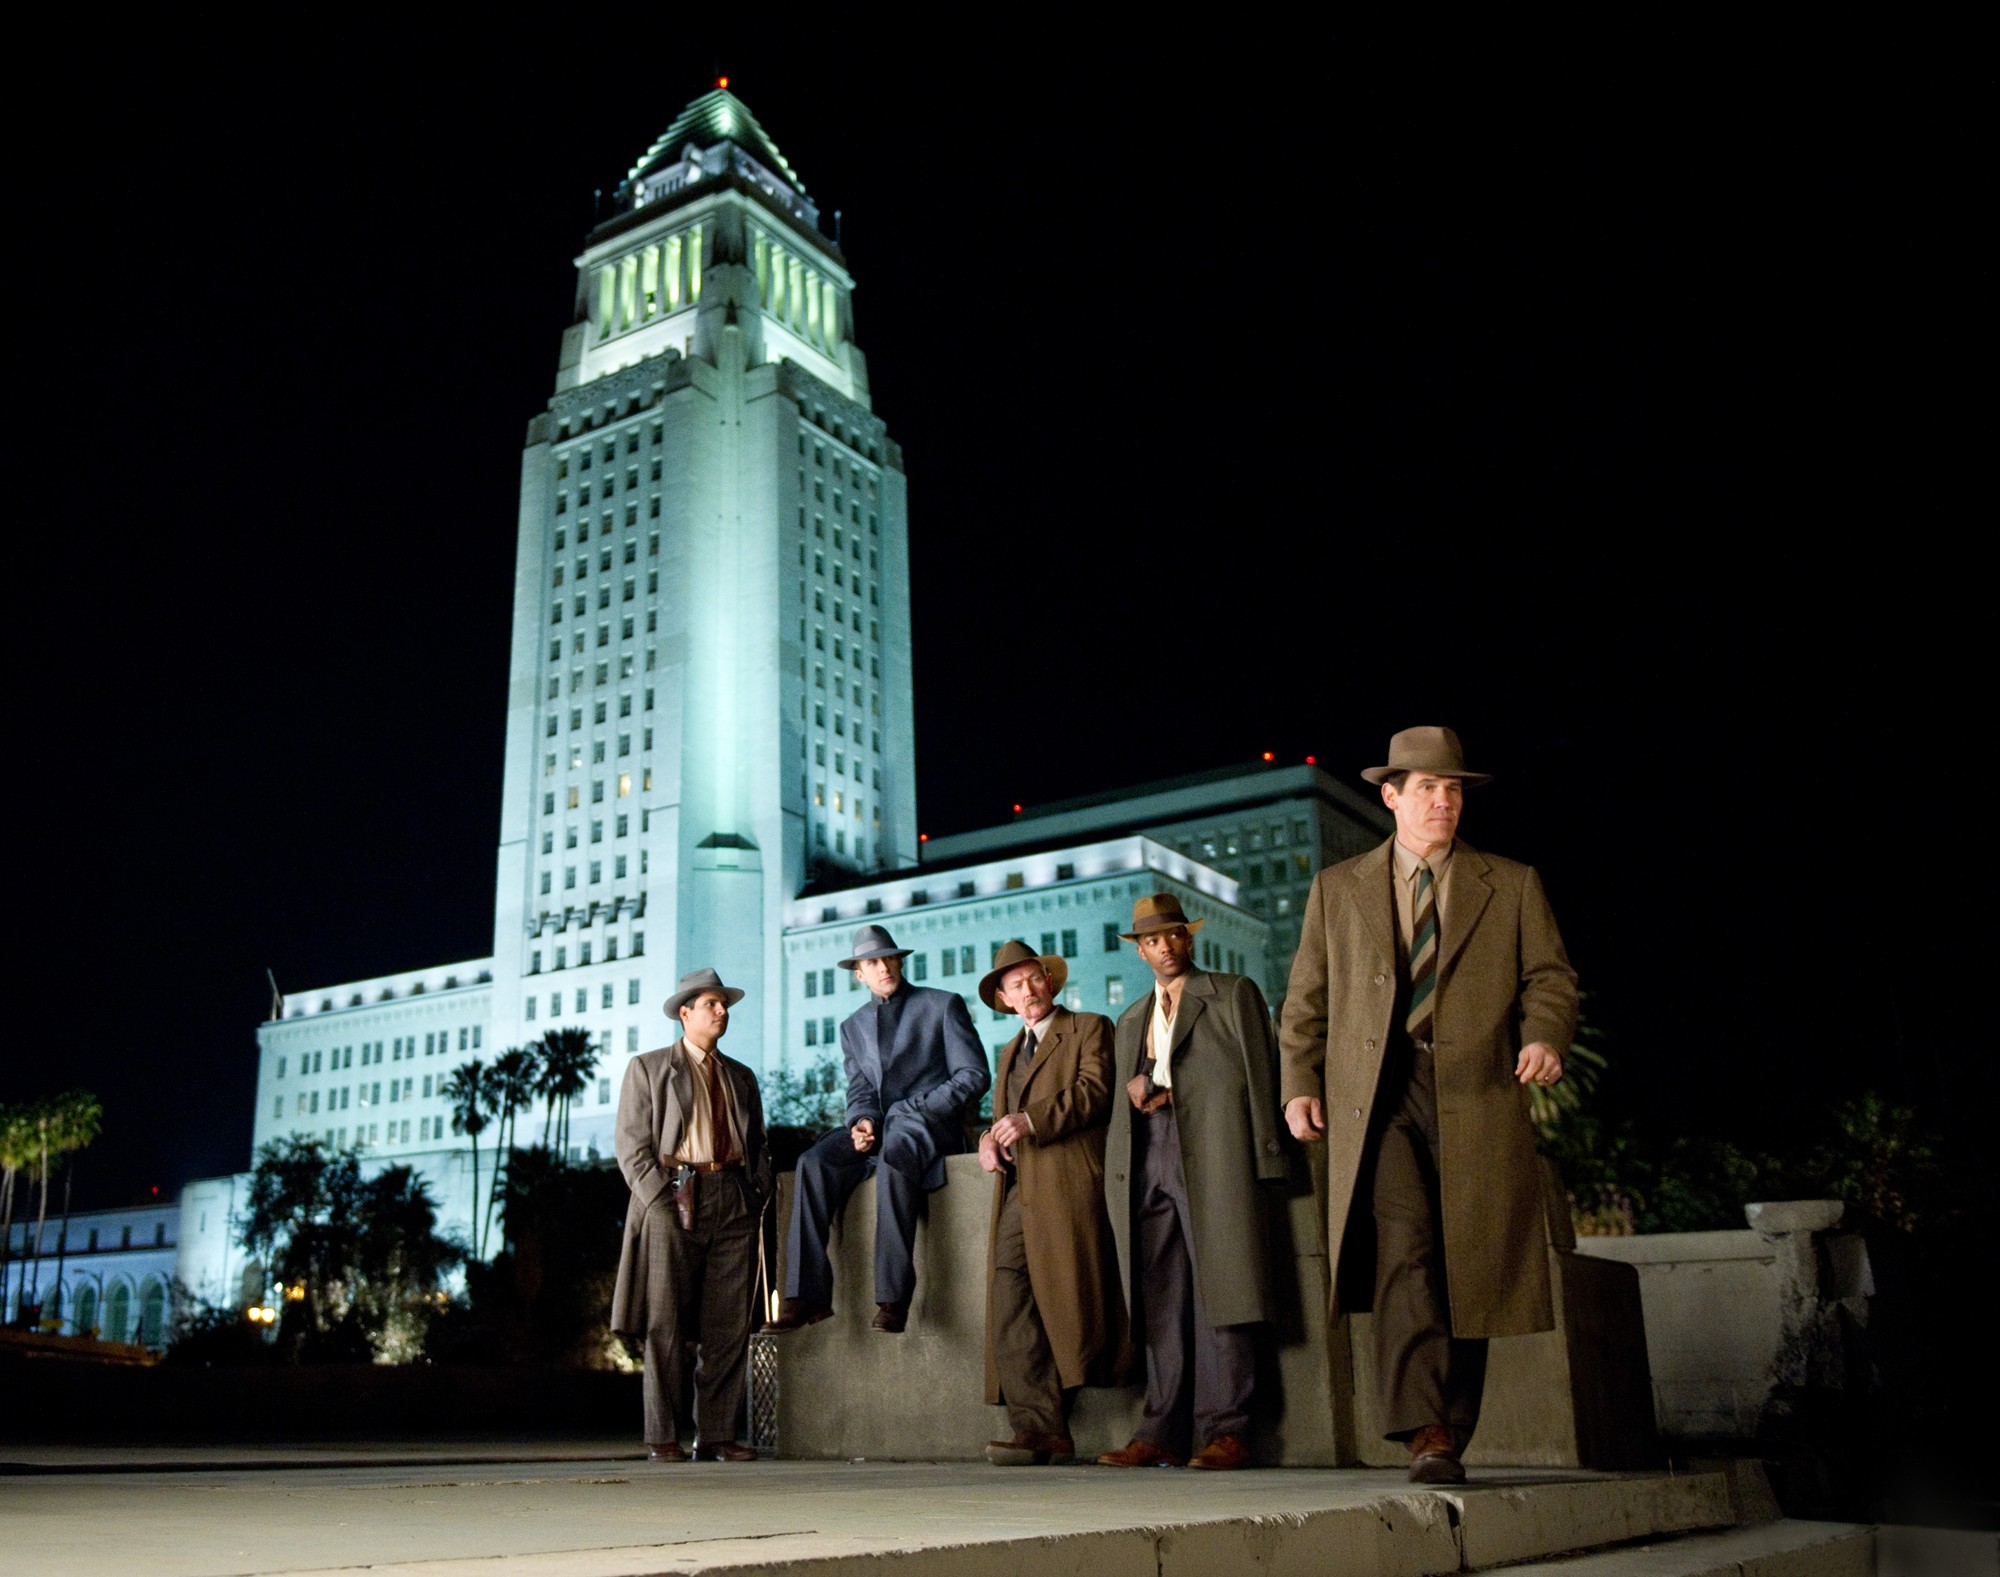 A scene from Warner Bros. Pictures' Gangster Squad (2013)